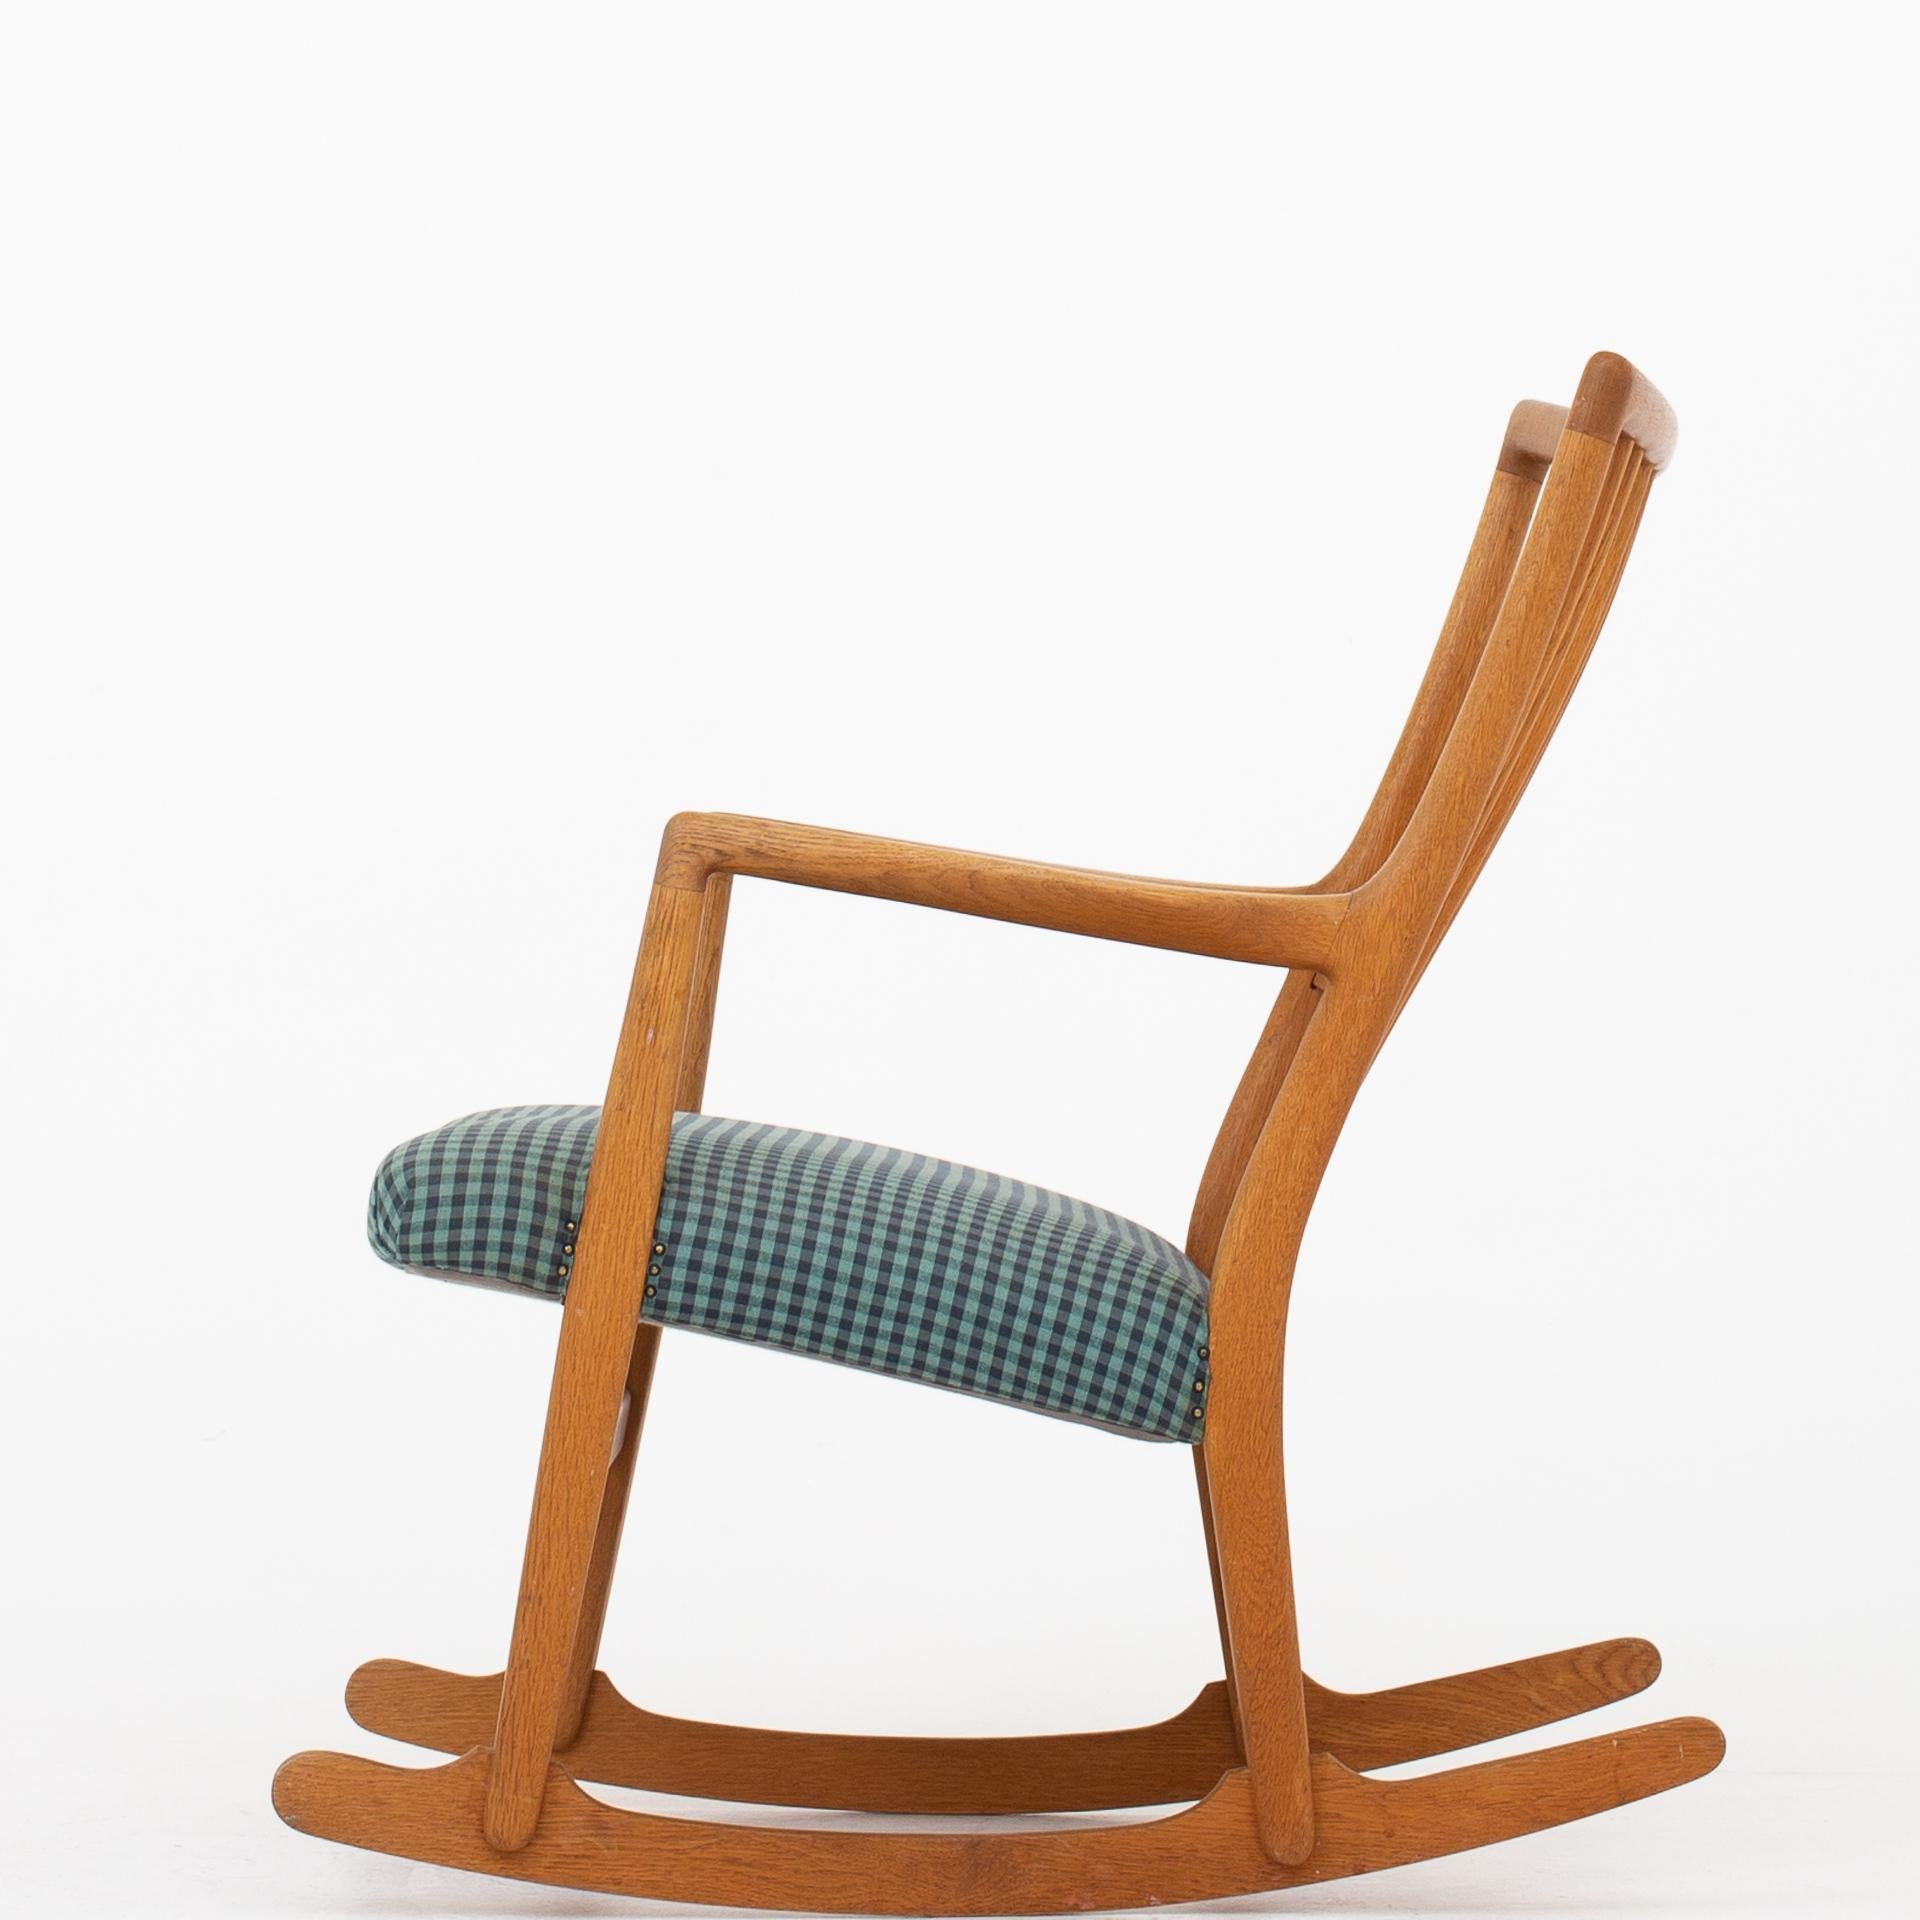 ML 33 - Rocking chair in oak with wool seat. Design, 1940. Maker Mikael Laursen.